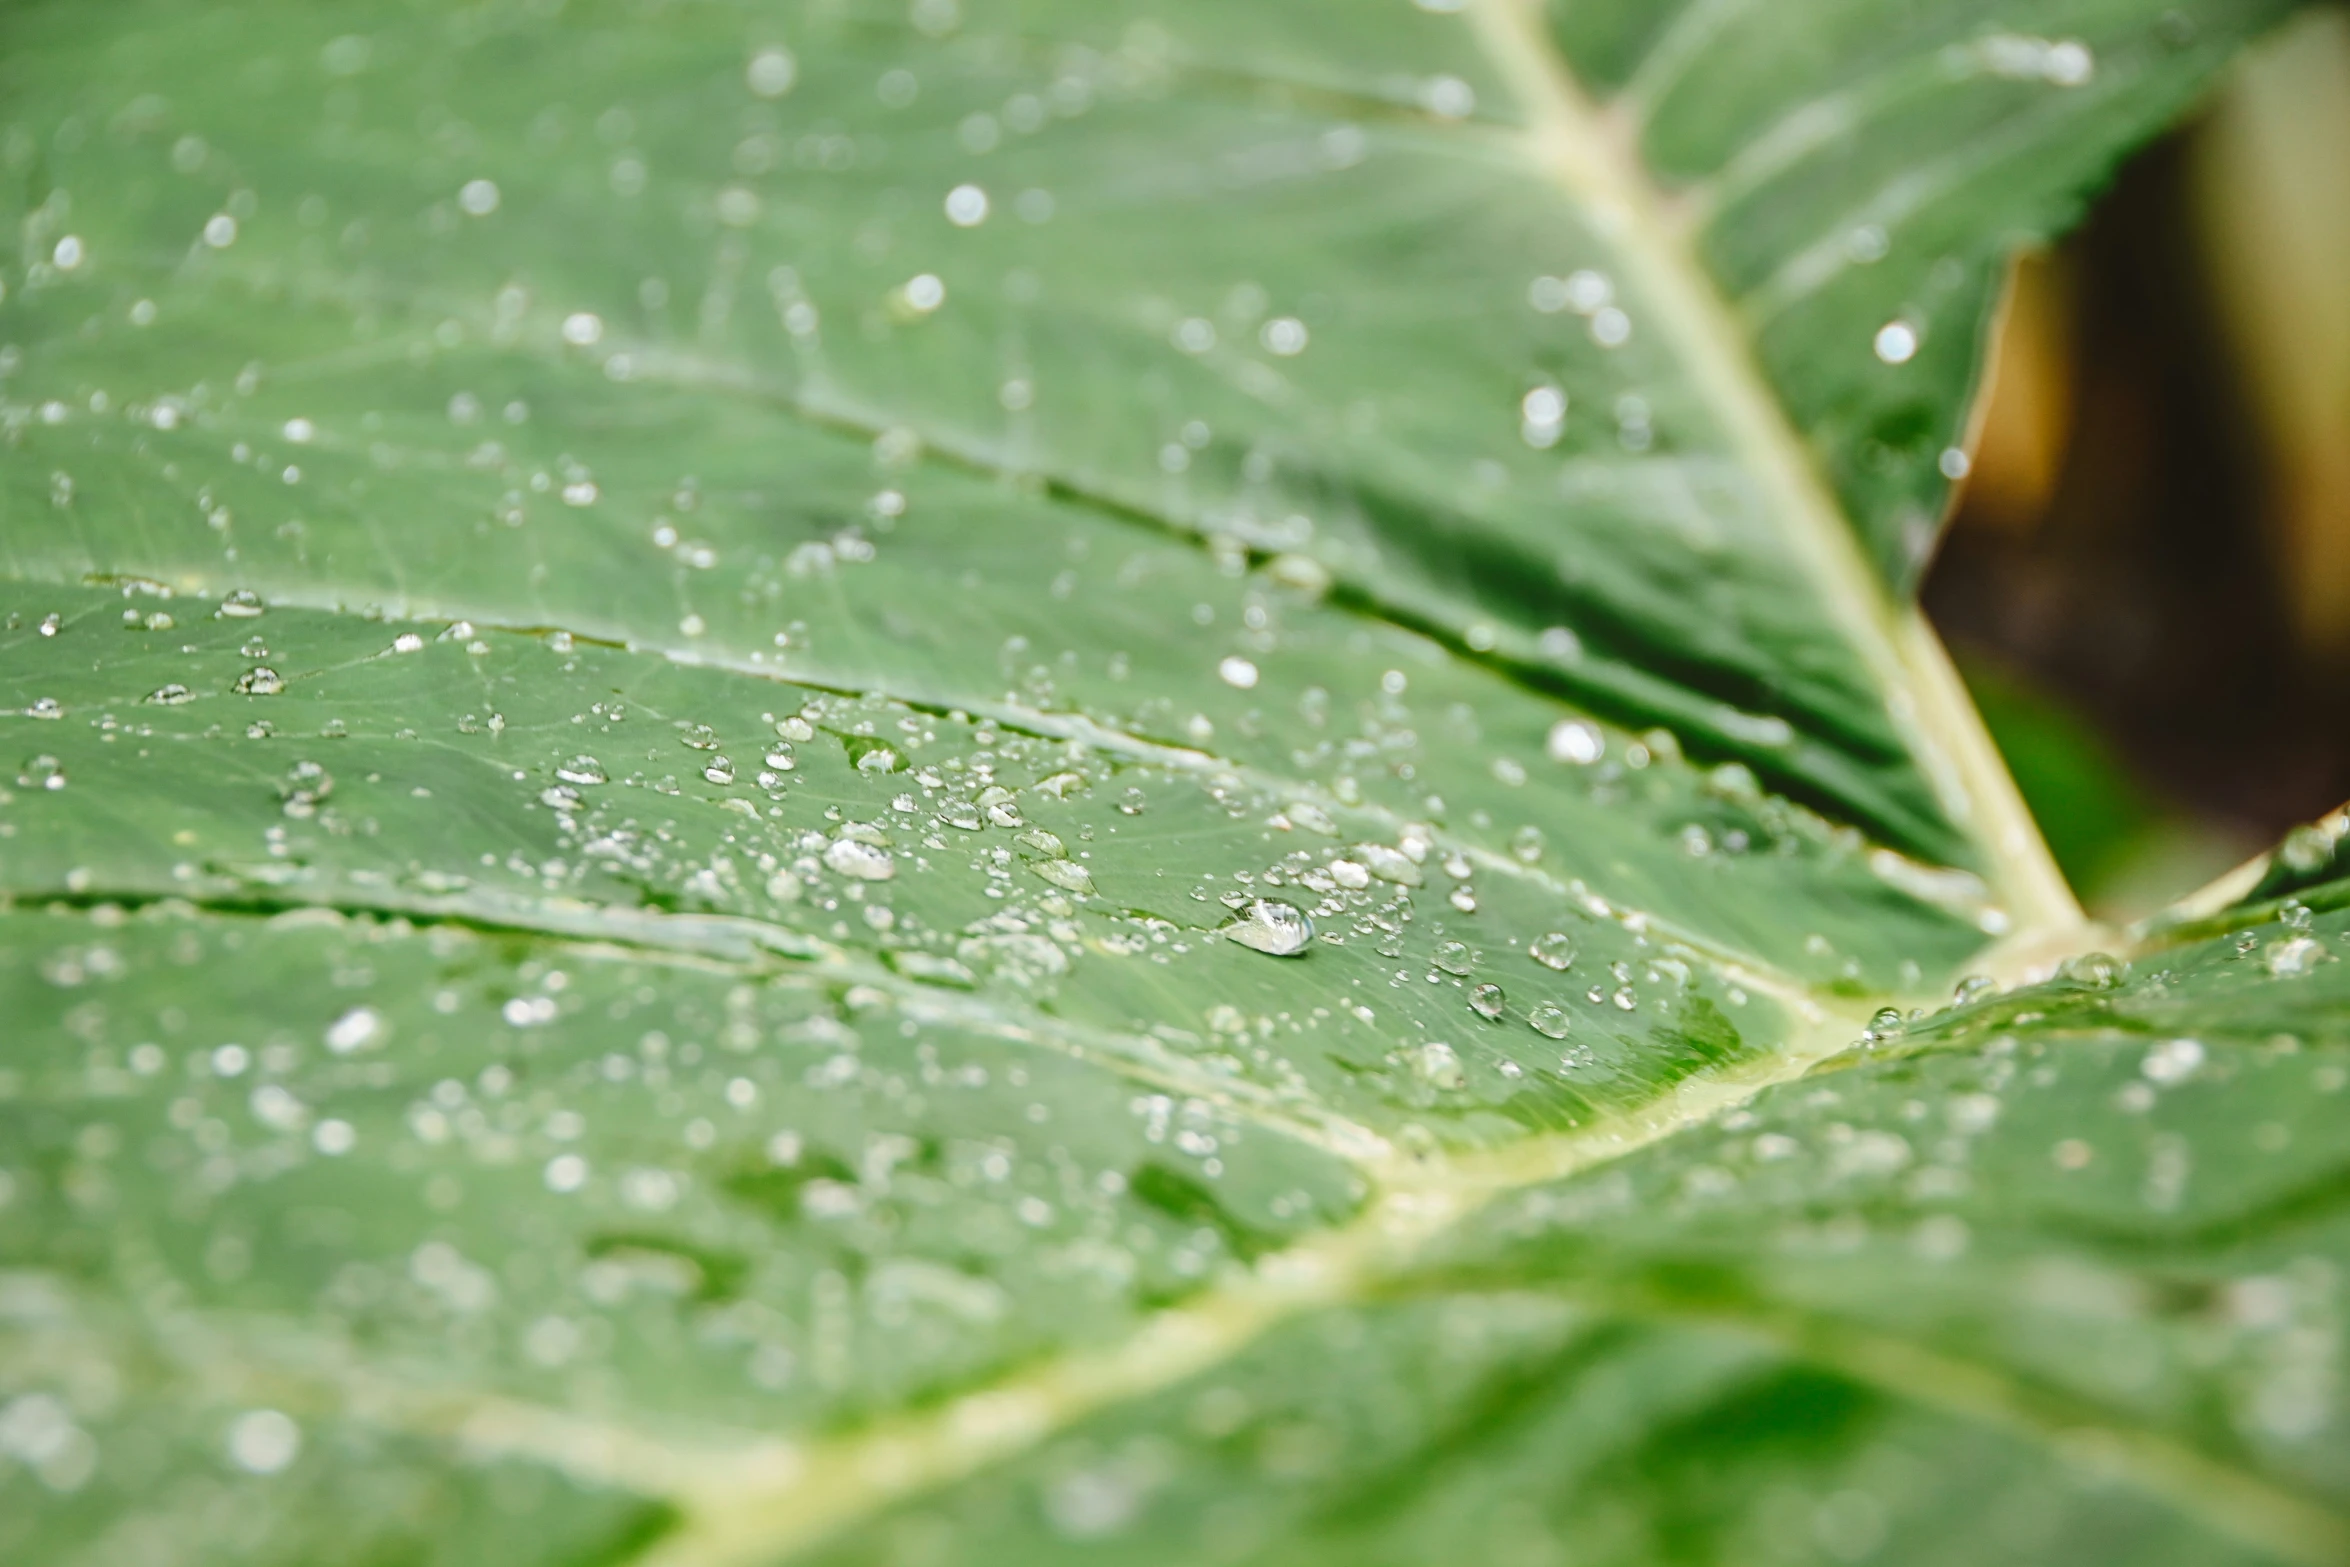 water droplets on leaves in the daytime